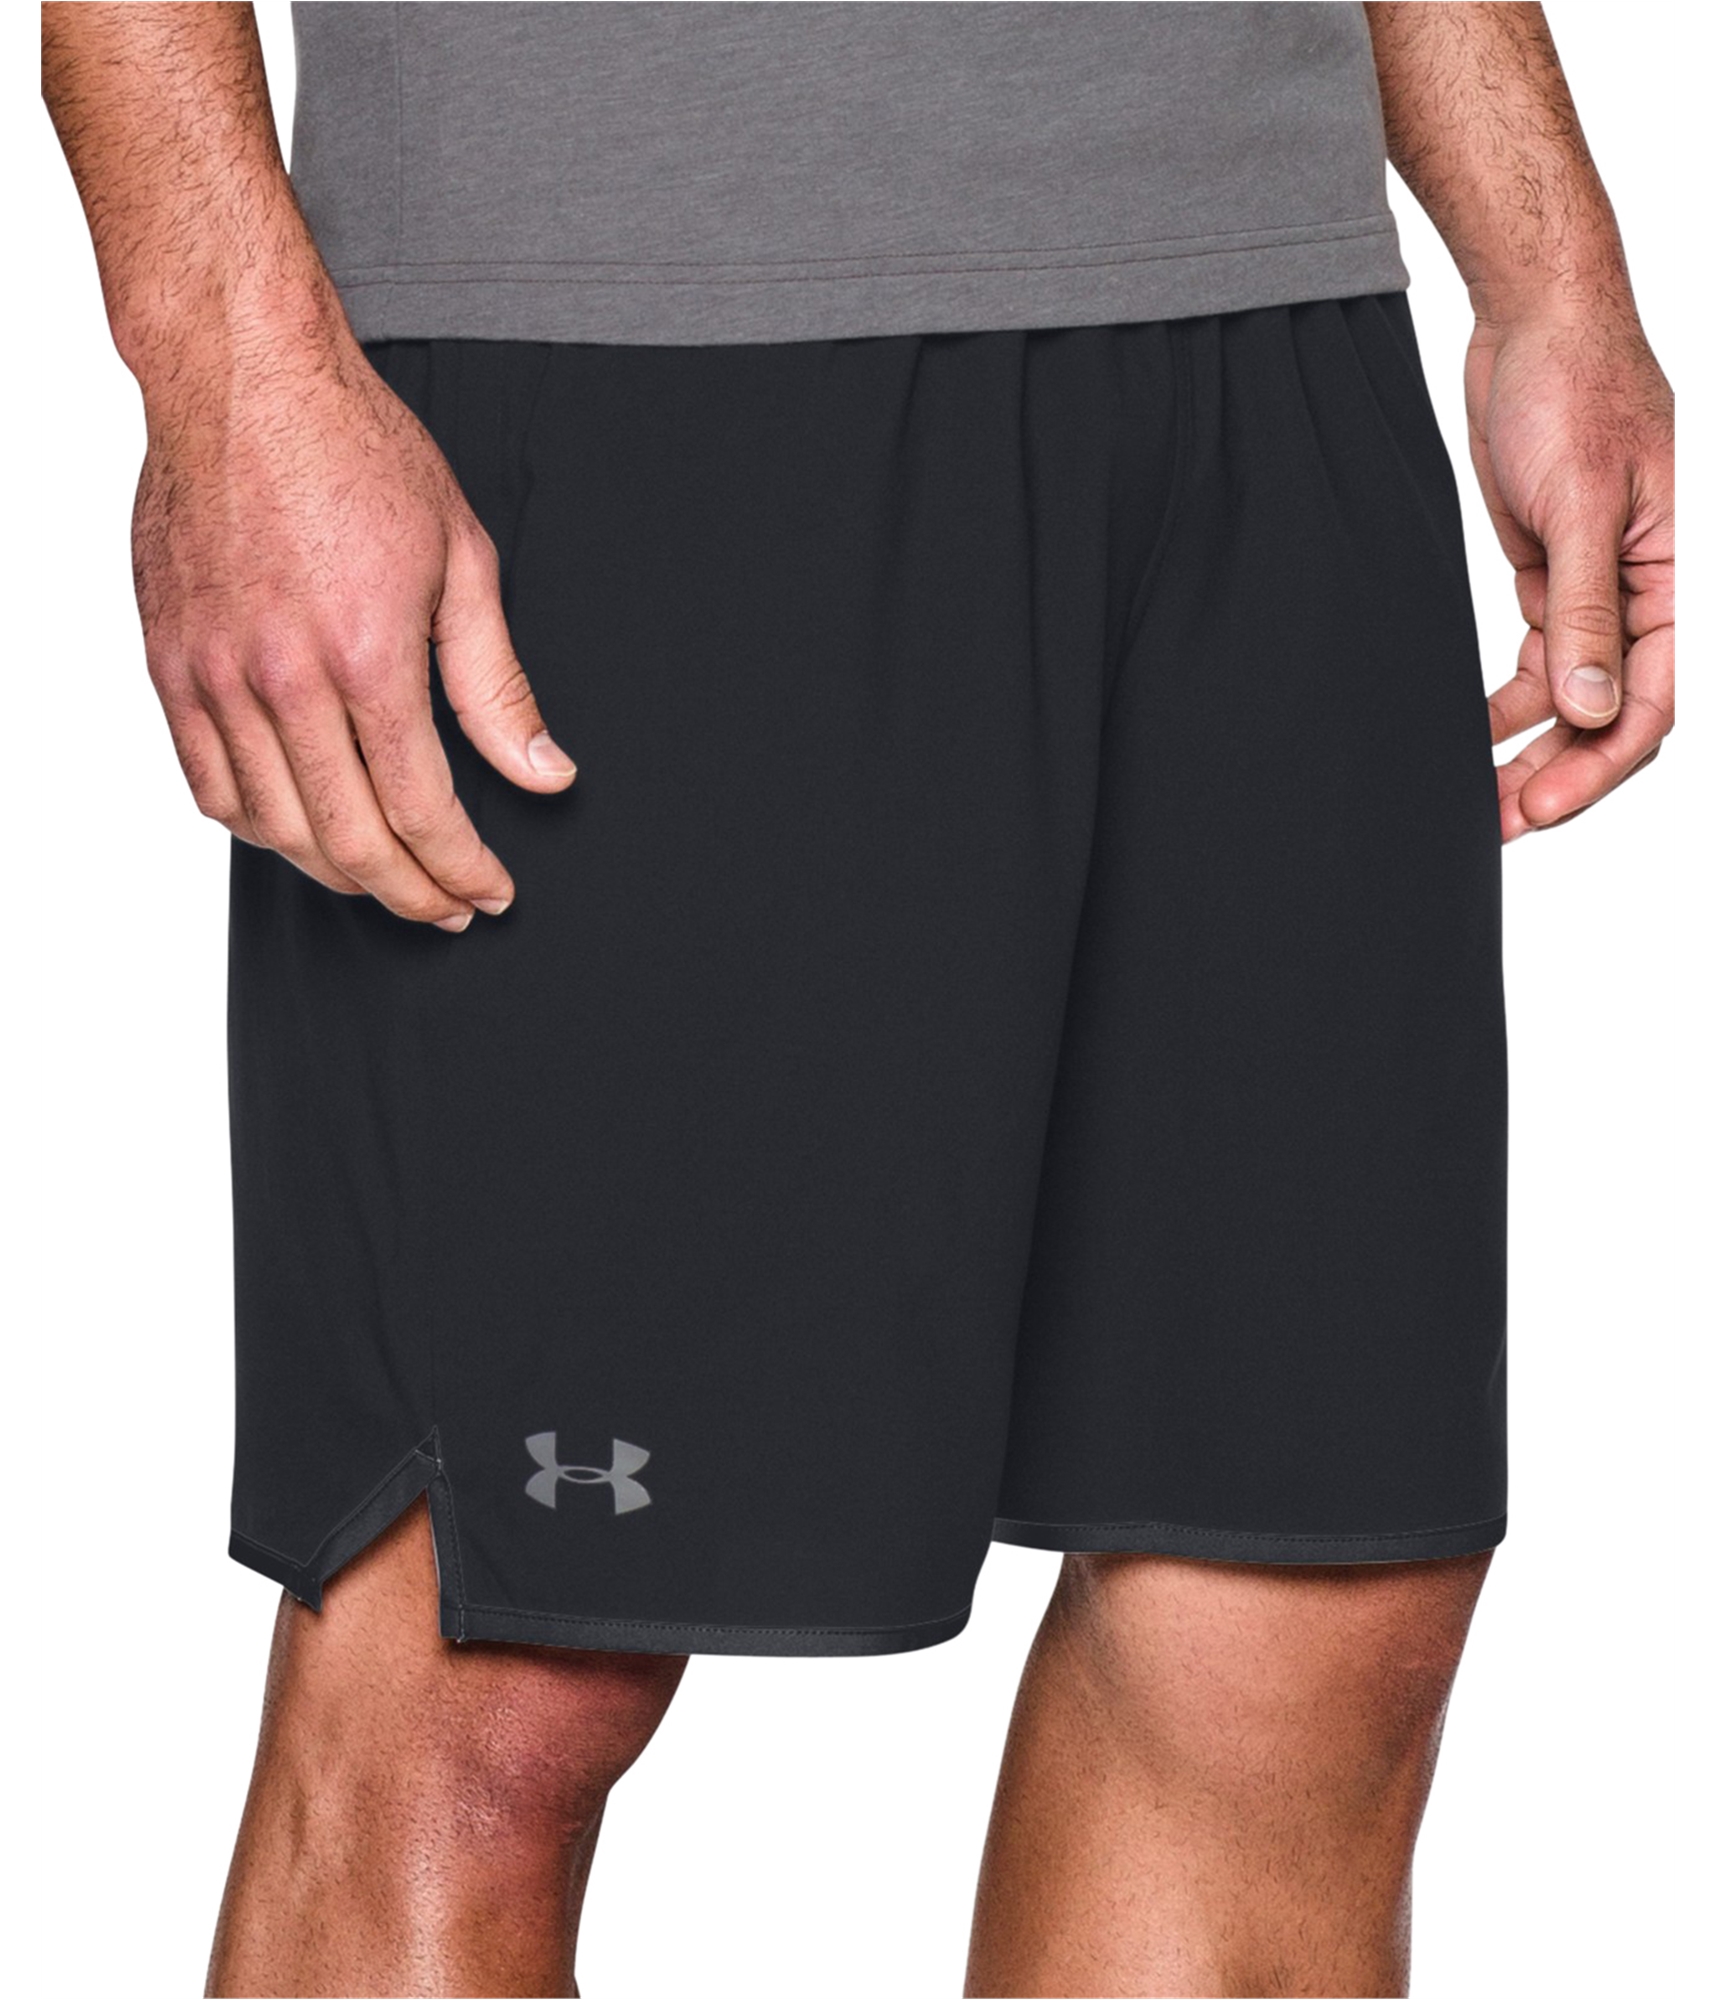 Under Armour Mens Woven Athletic Workout Shorts, Black, XX-Large | eBay